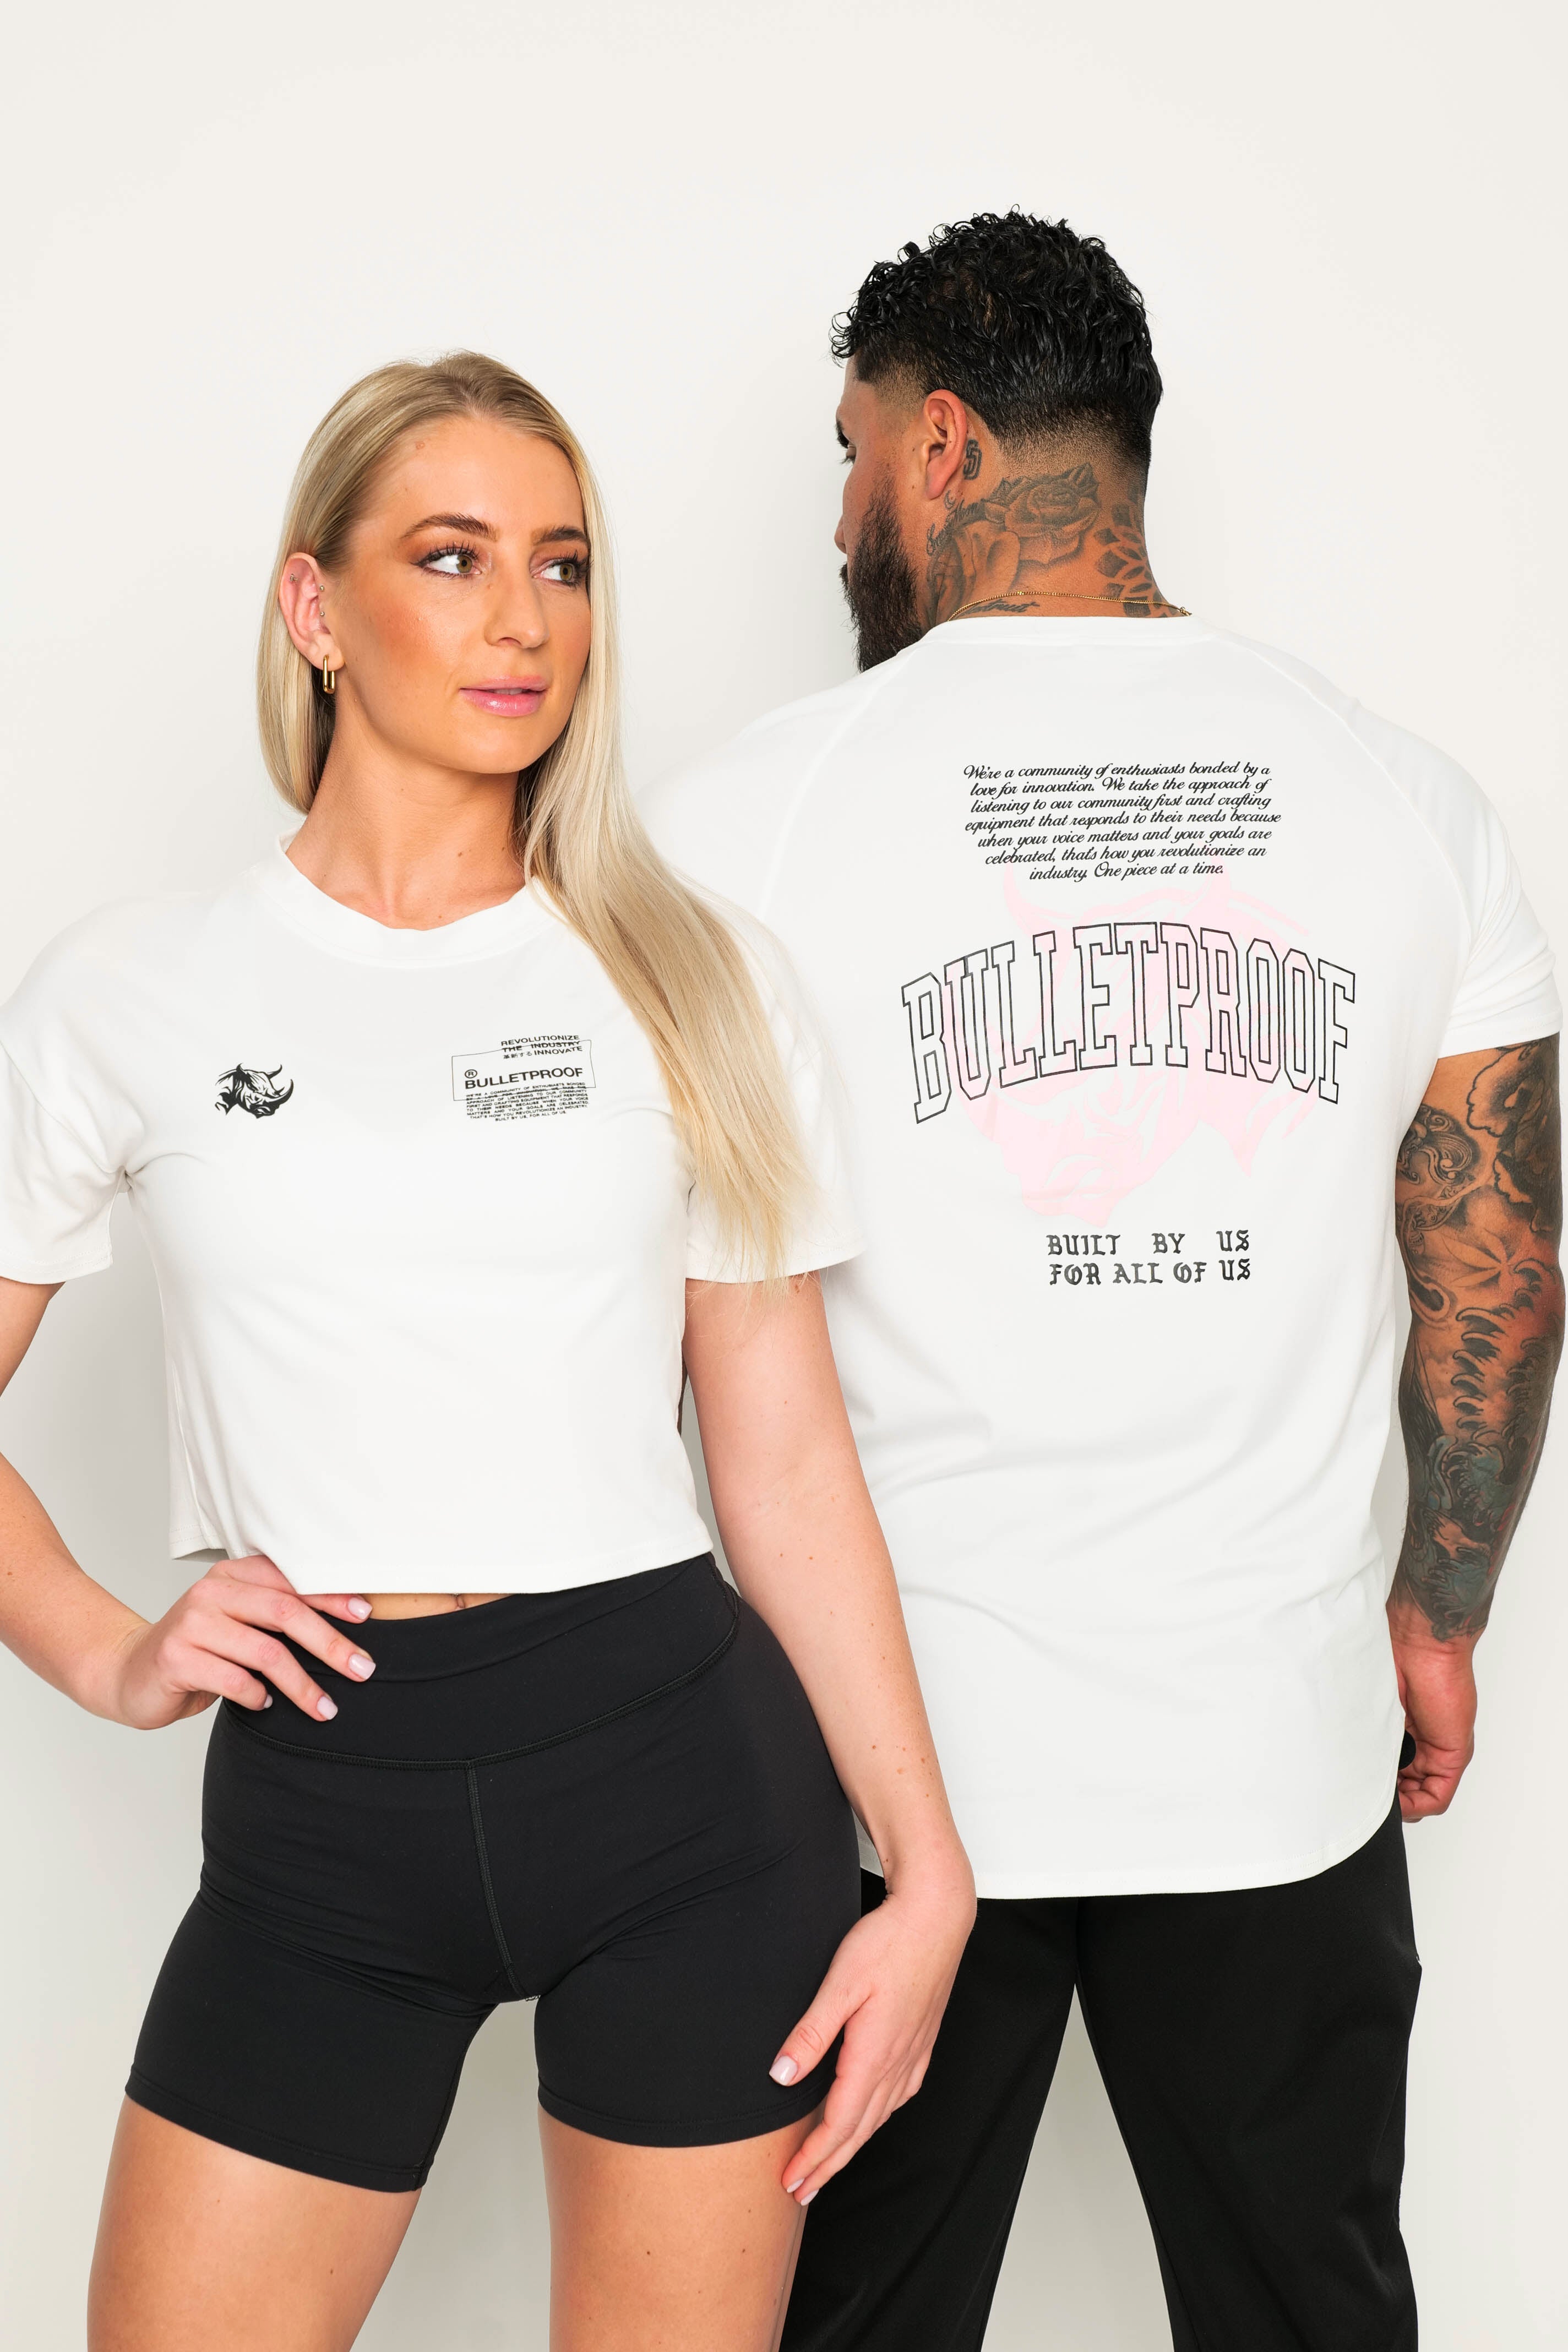 T-SHIRT - Bulletproof Power Team: Built by Us for Us